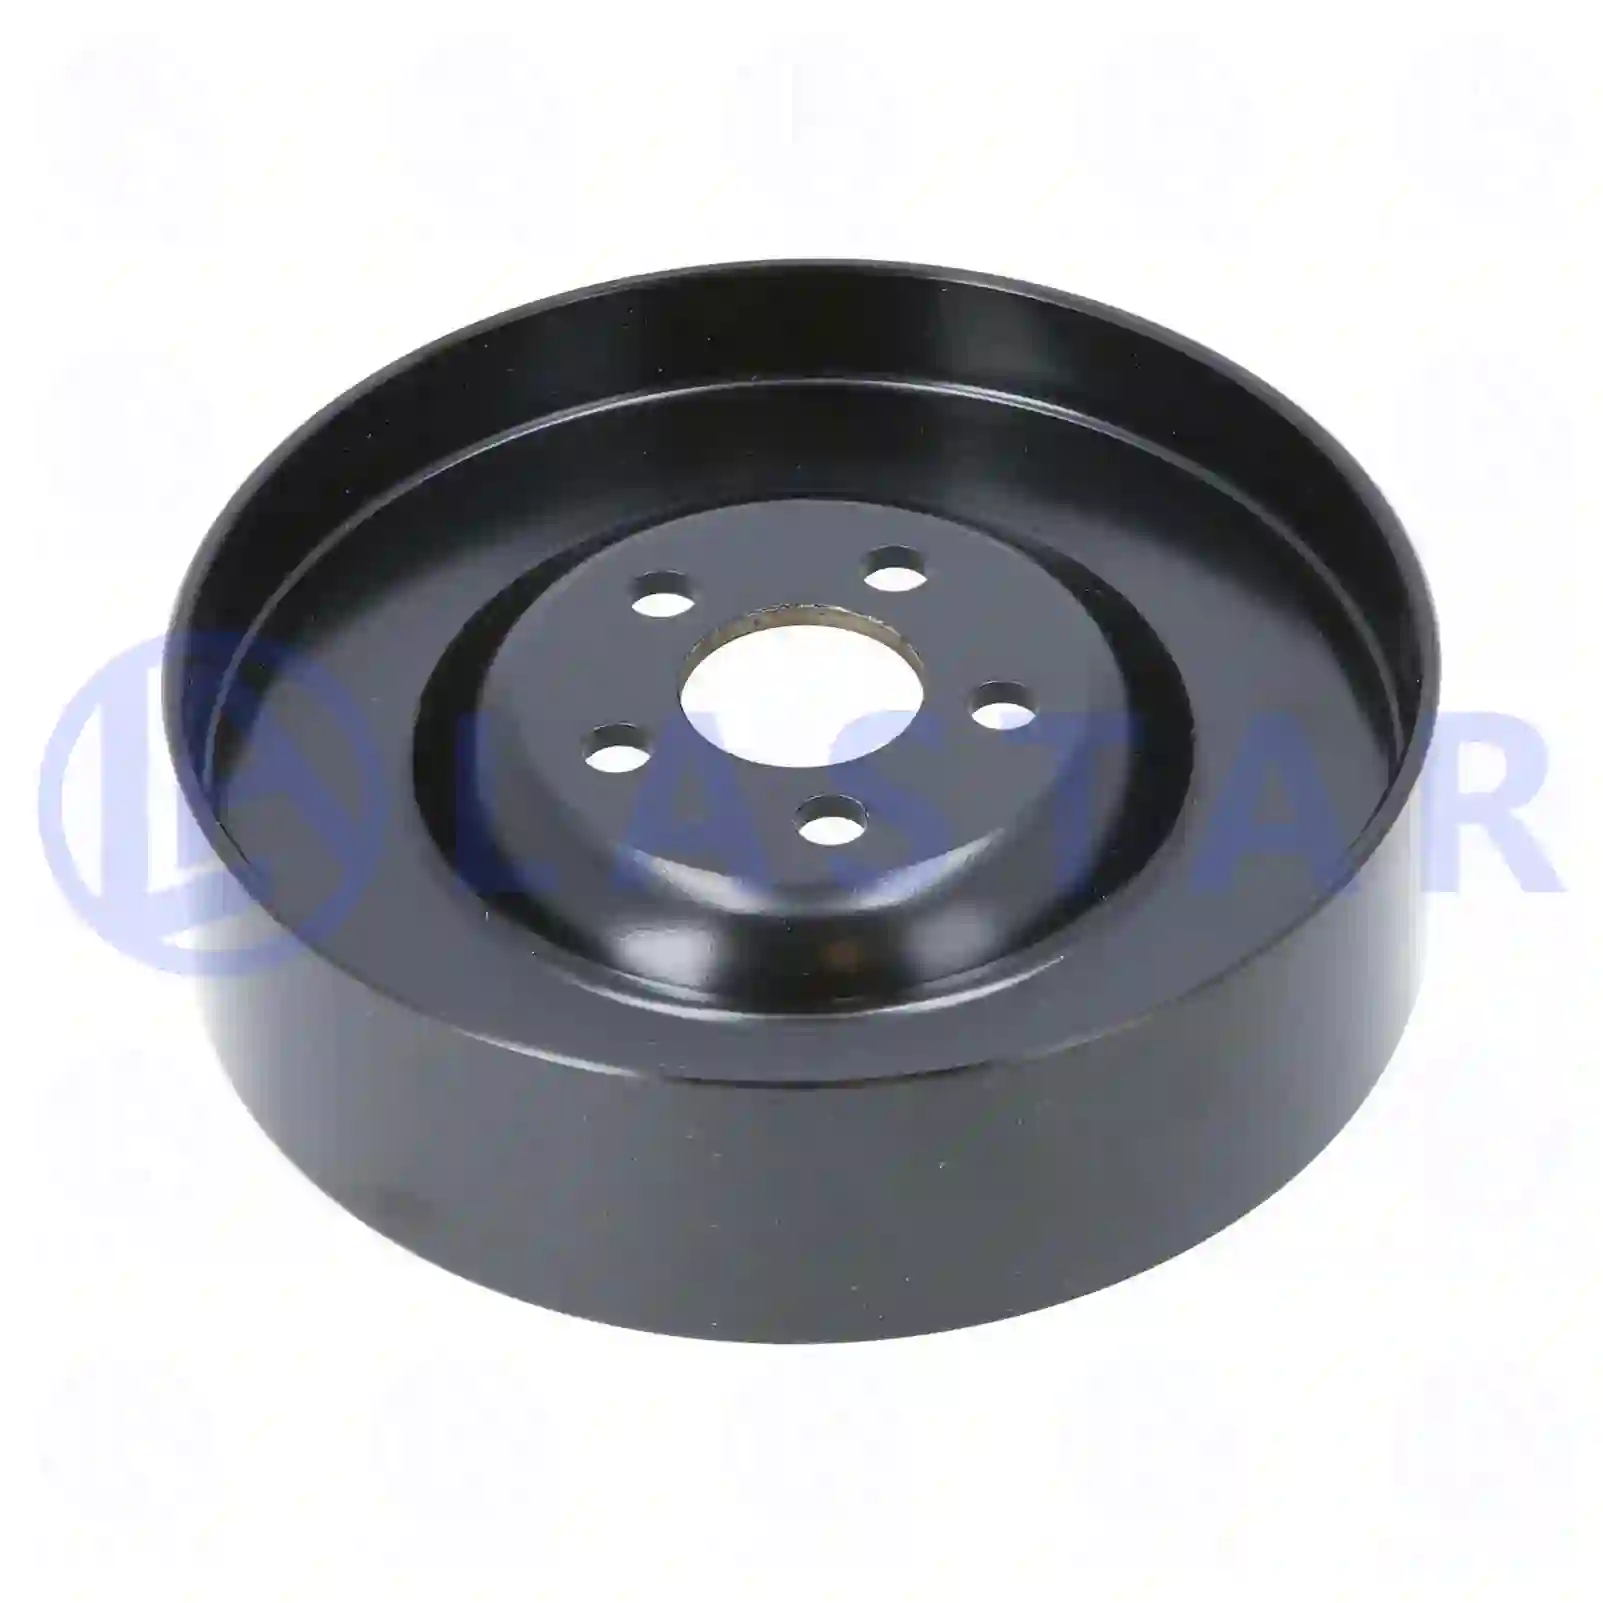 Pulley, for vehicles without retarder, 77709404, 7420711223, 20711223, ZG01930-0008 ||  77709404 Lastar Spare Part | Truck Spare Parts, Auotomotive Spare Parts Pulley, for vehicles without retarder, 77709404, 7420711223, 20711223, ZG01930-0008 ||  77709404 Lastar Spare Part | Truck Spare Parts, Auotomotive Spare Parts